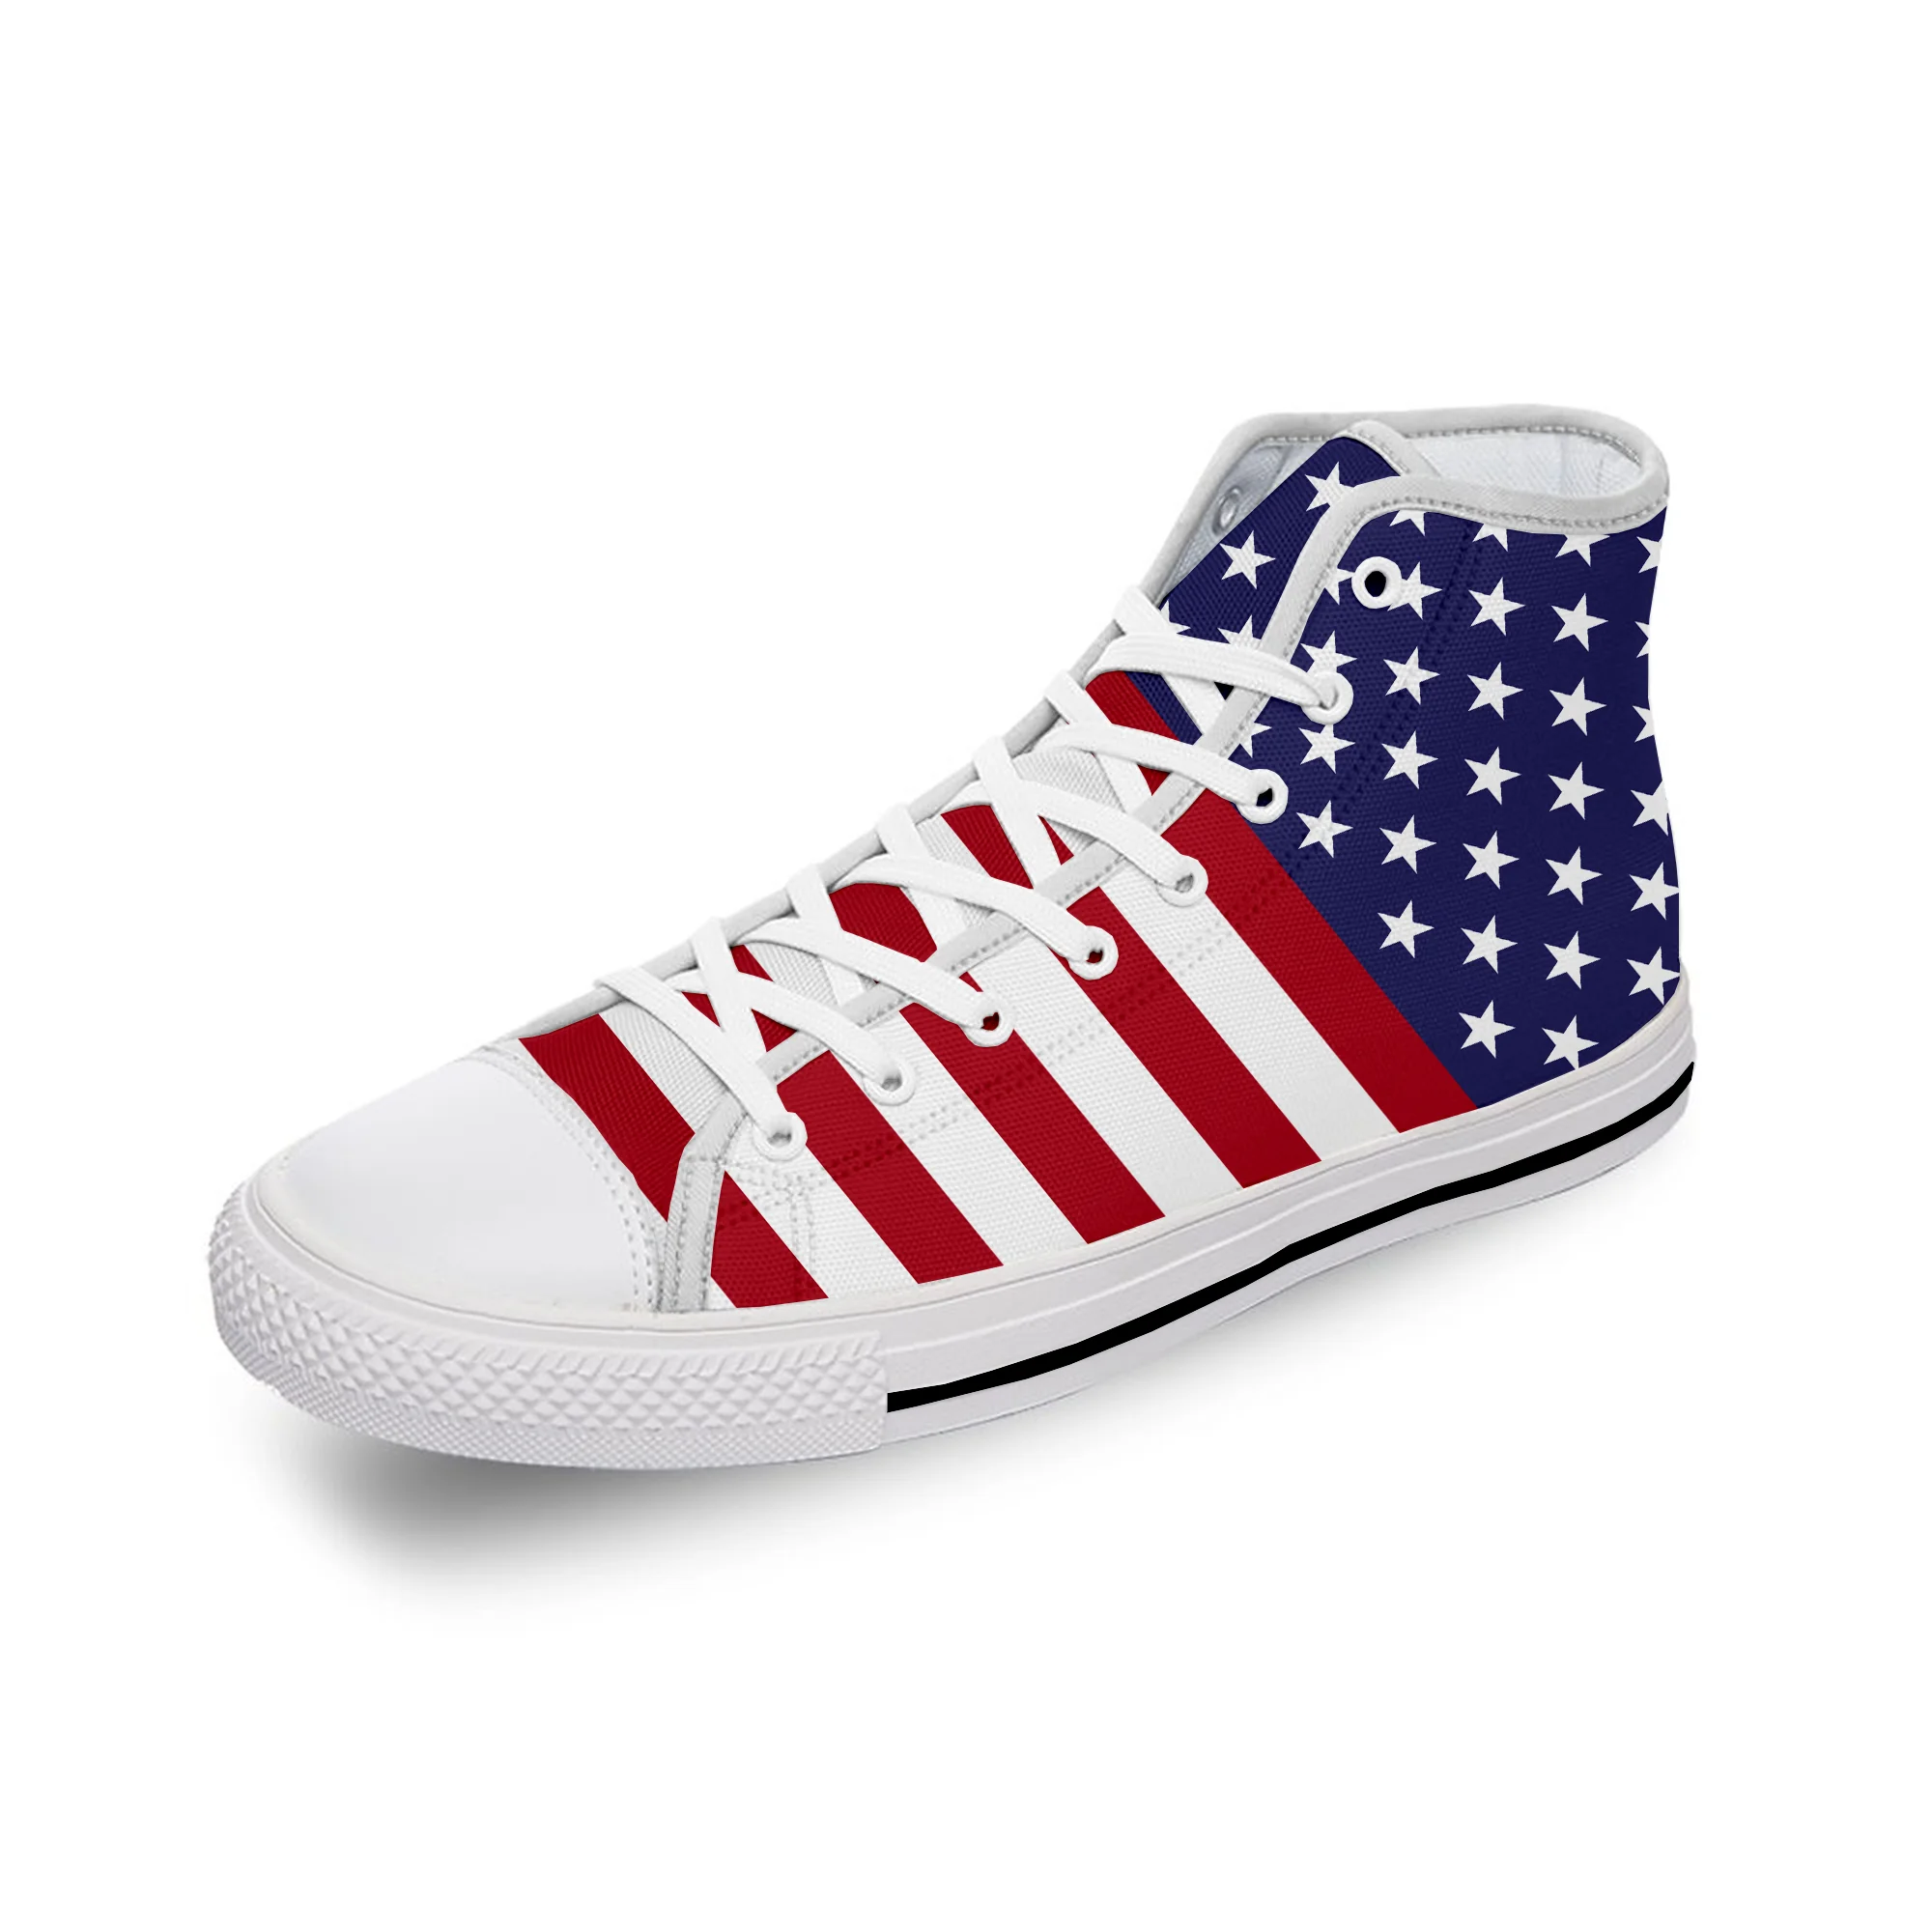 USA FLAG I LOVE AMERICA Patriot Casual Cloth Shoes High Top Lightweight Breathable Print Men Women Sneakers Sports shoe 2020 fashion plush winter men high top women sneakers lightweight men casual shoes outdoor sports footwear non slip walking shoe